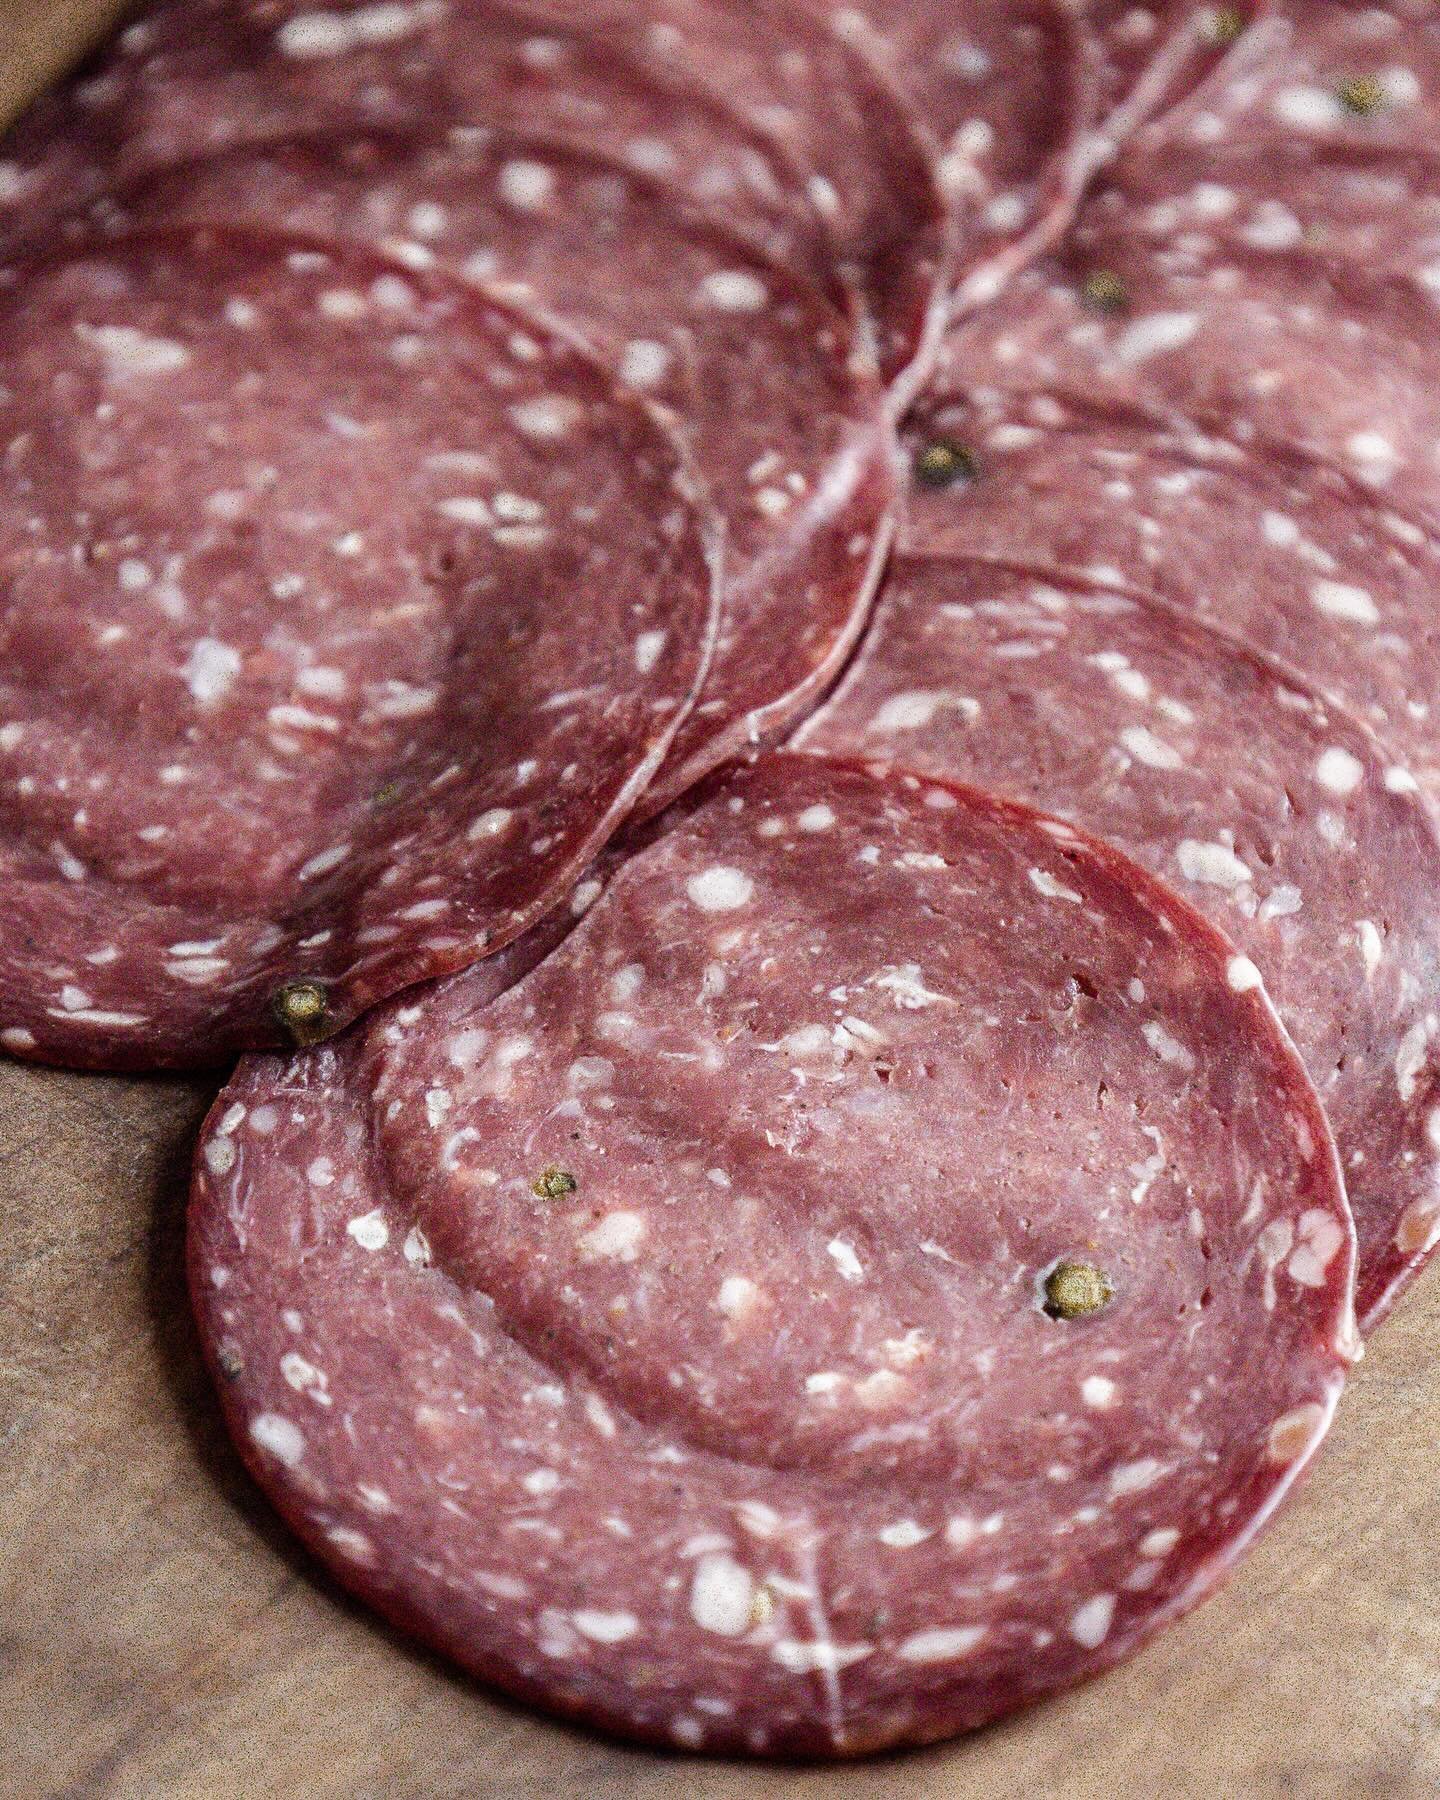 Product spotlight 🦌

Our green pepper venison salami is made with 100% Scottish Wild Venison, which we sustainably source from our local area, the Scottish Highlands 🌲

It has no added pork or pork fat which makes it a very lean salami and is gentl